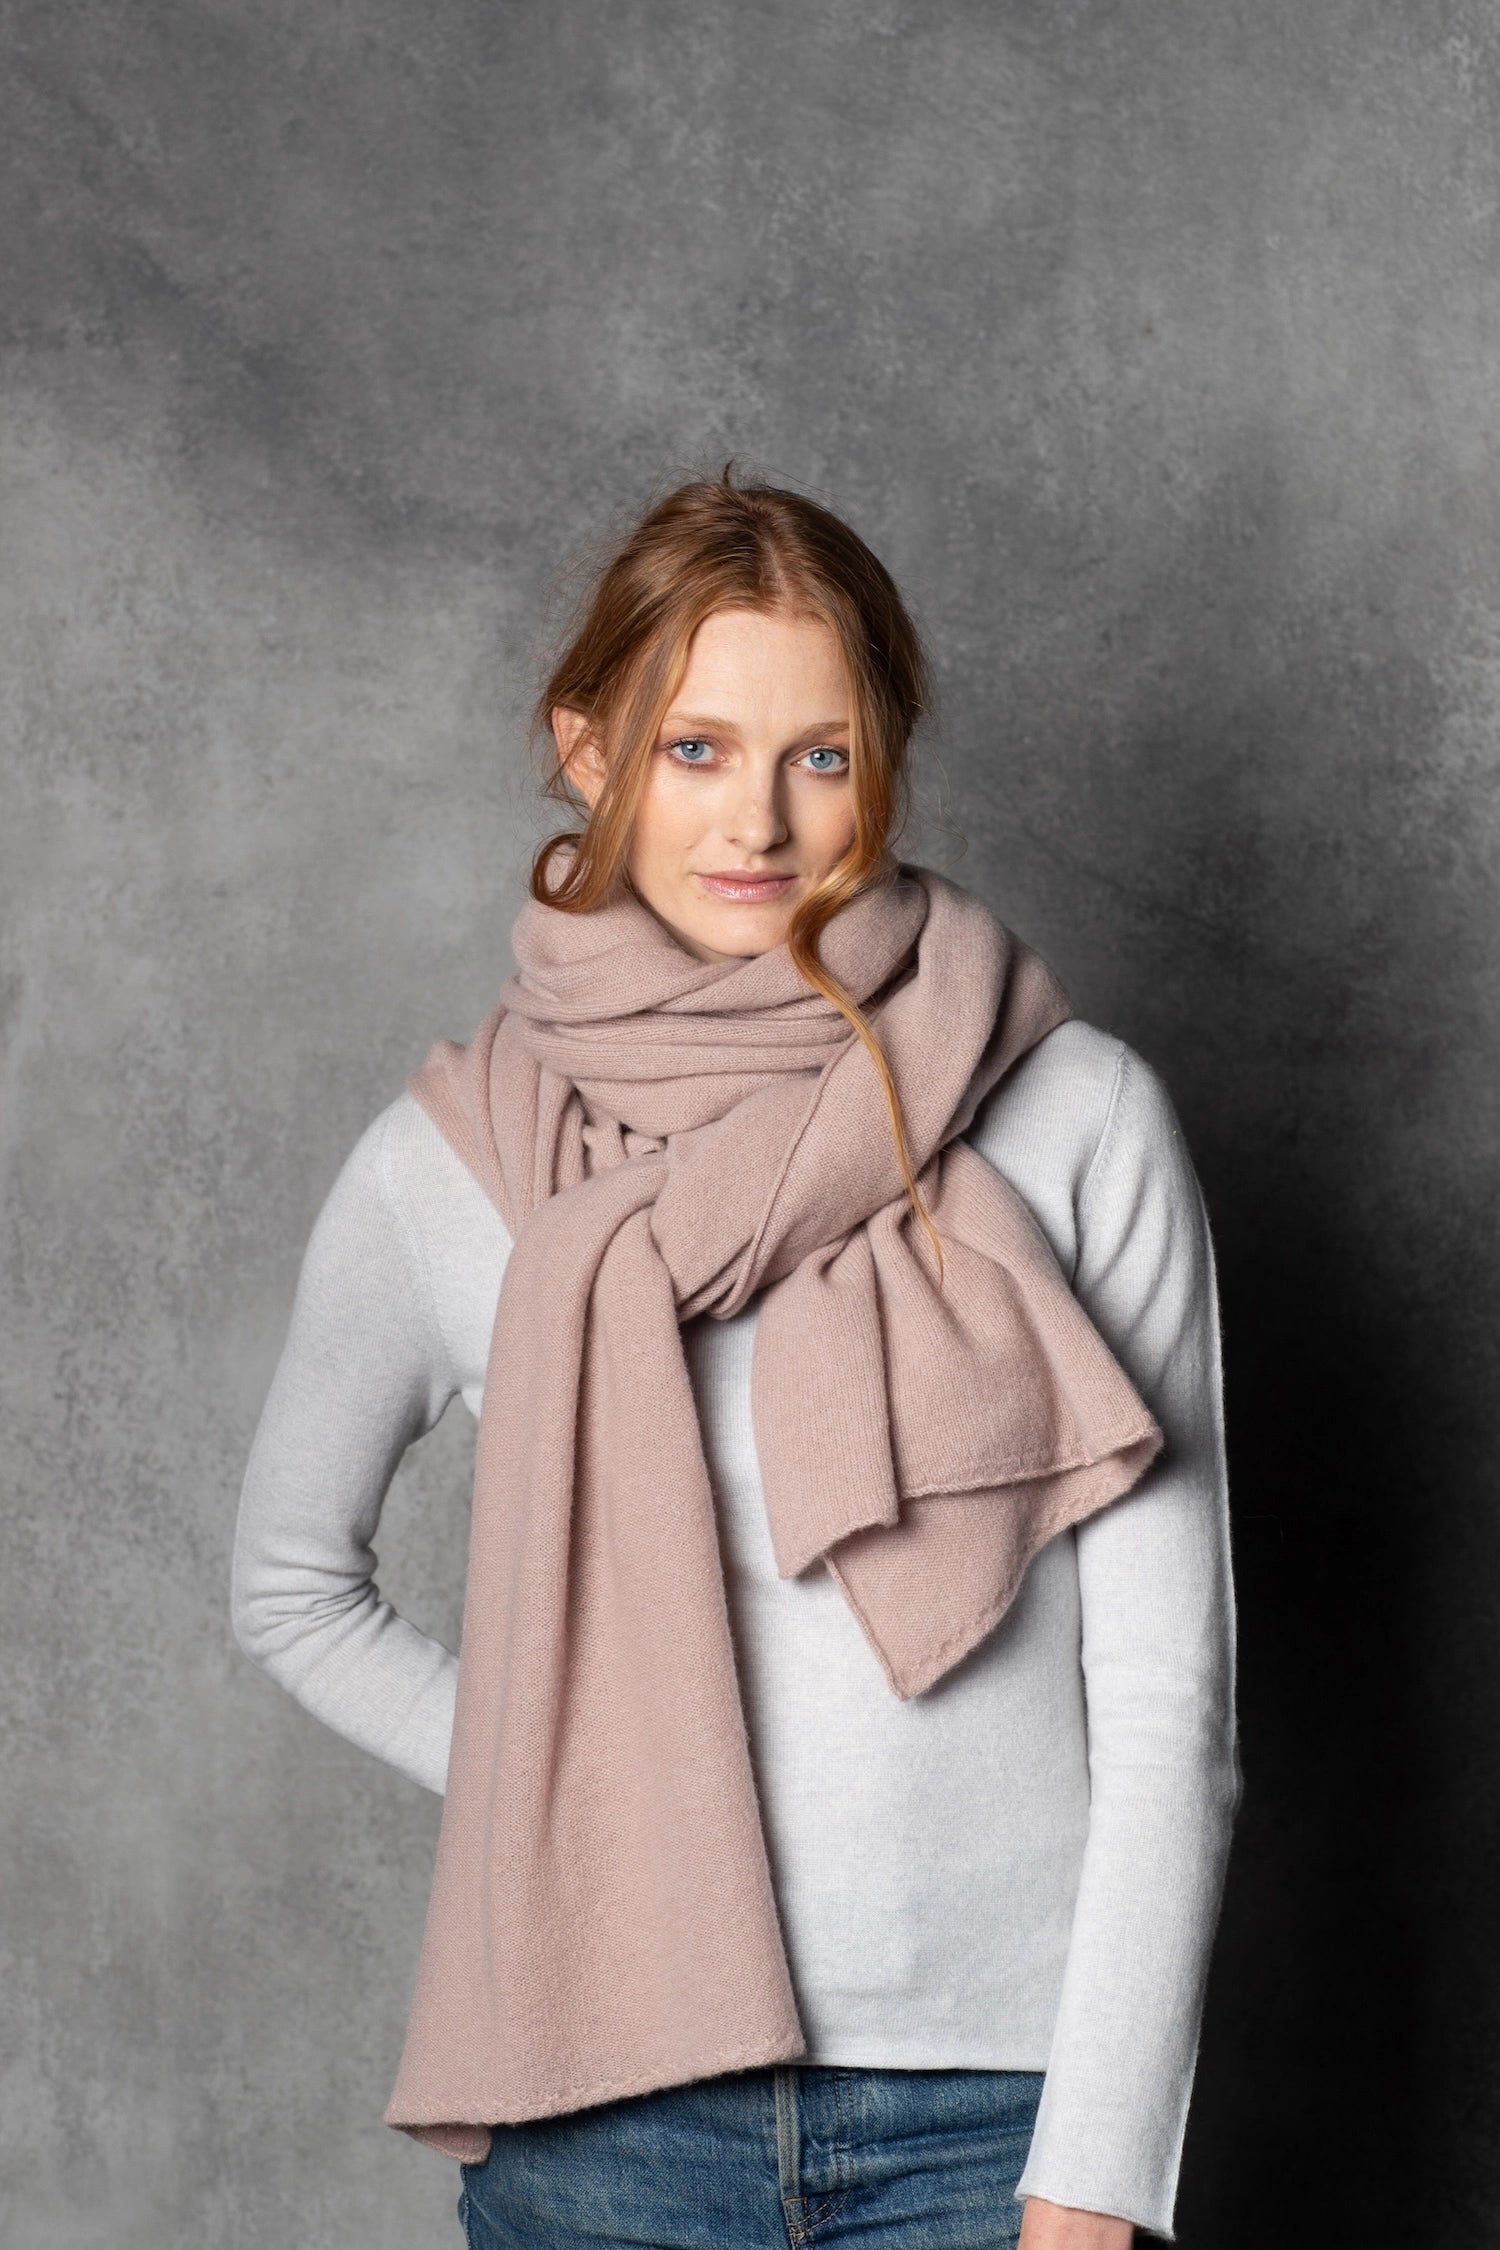 Large cashmere wrap scarf in dusty pink